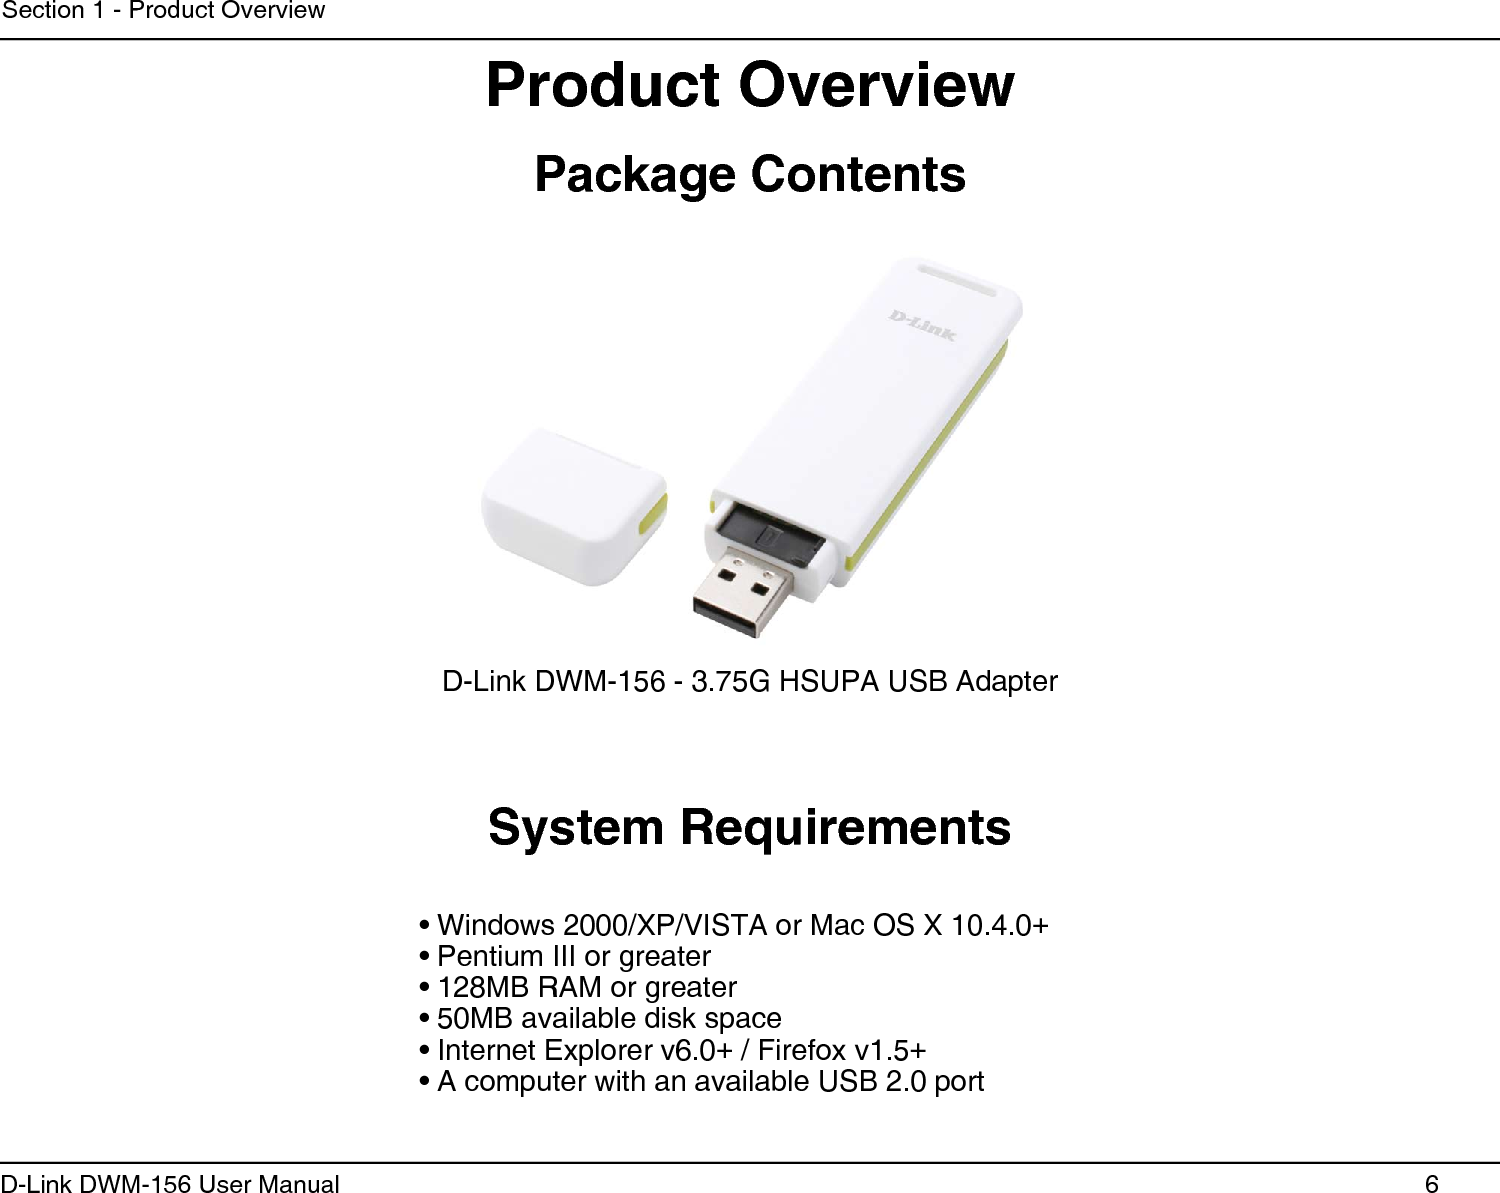 6D-Link DWM-156 User ManualSection 1 - Product OverviewWindows 2000/XP/VISTA or Mac OS X 10.4.0•  +Pentium III or greater• 128MB RAM or greater• 50MB available disk space• Internet Explorer v6.0•  + / Firefox v1.5+ A computer with an available USB 2.0 port• Product OverviewD-Link DWM-156 - 3.75G HSUPA USB AdapterSystem RequirementsPackage Contents